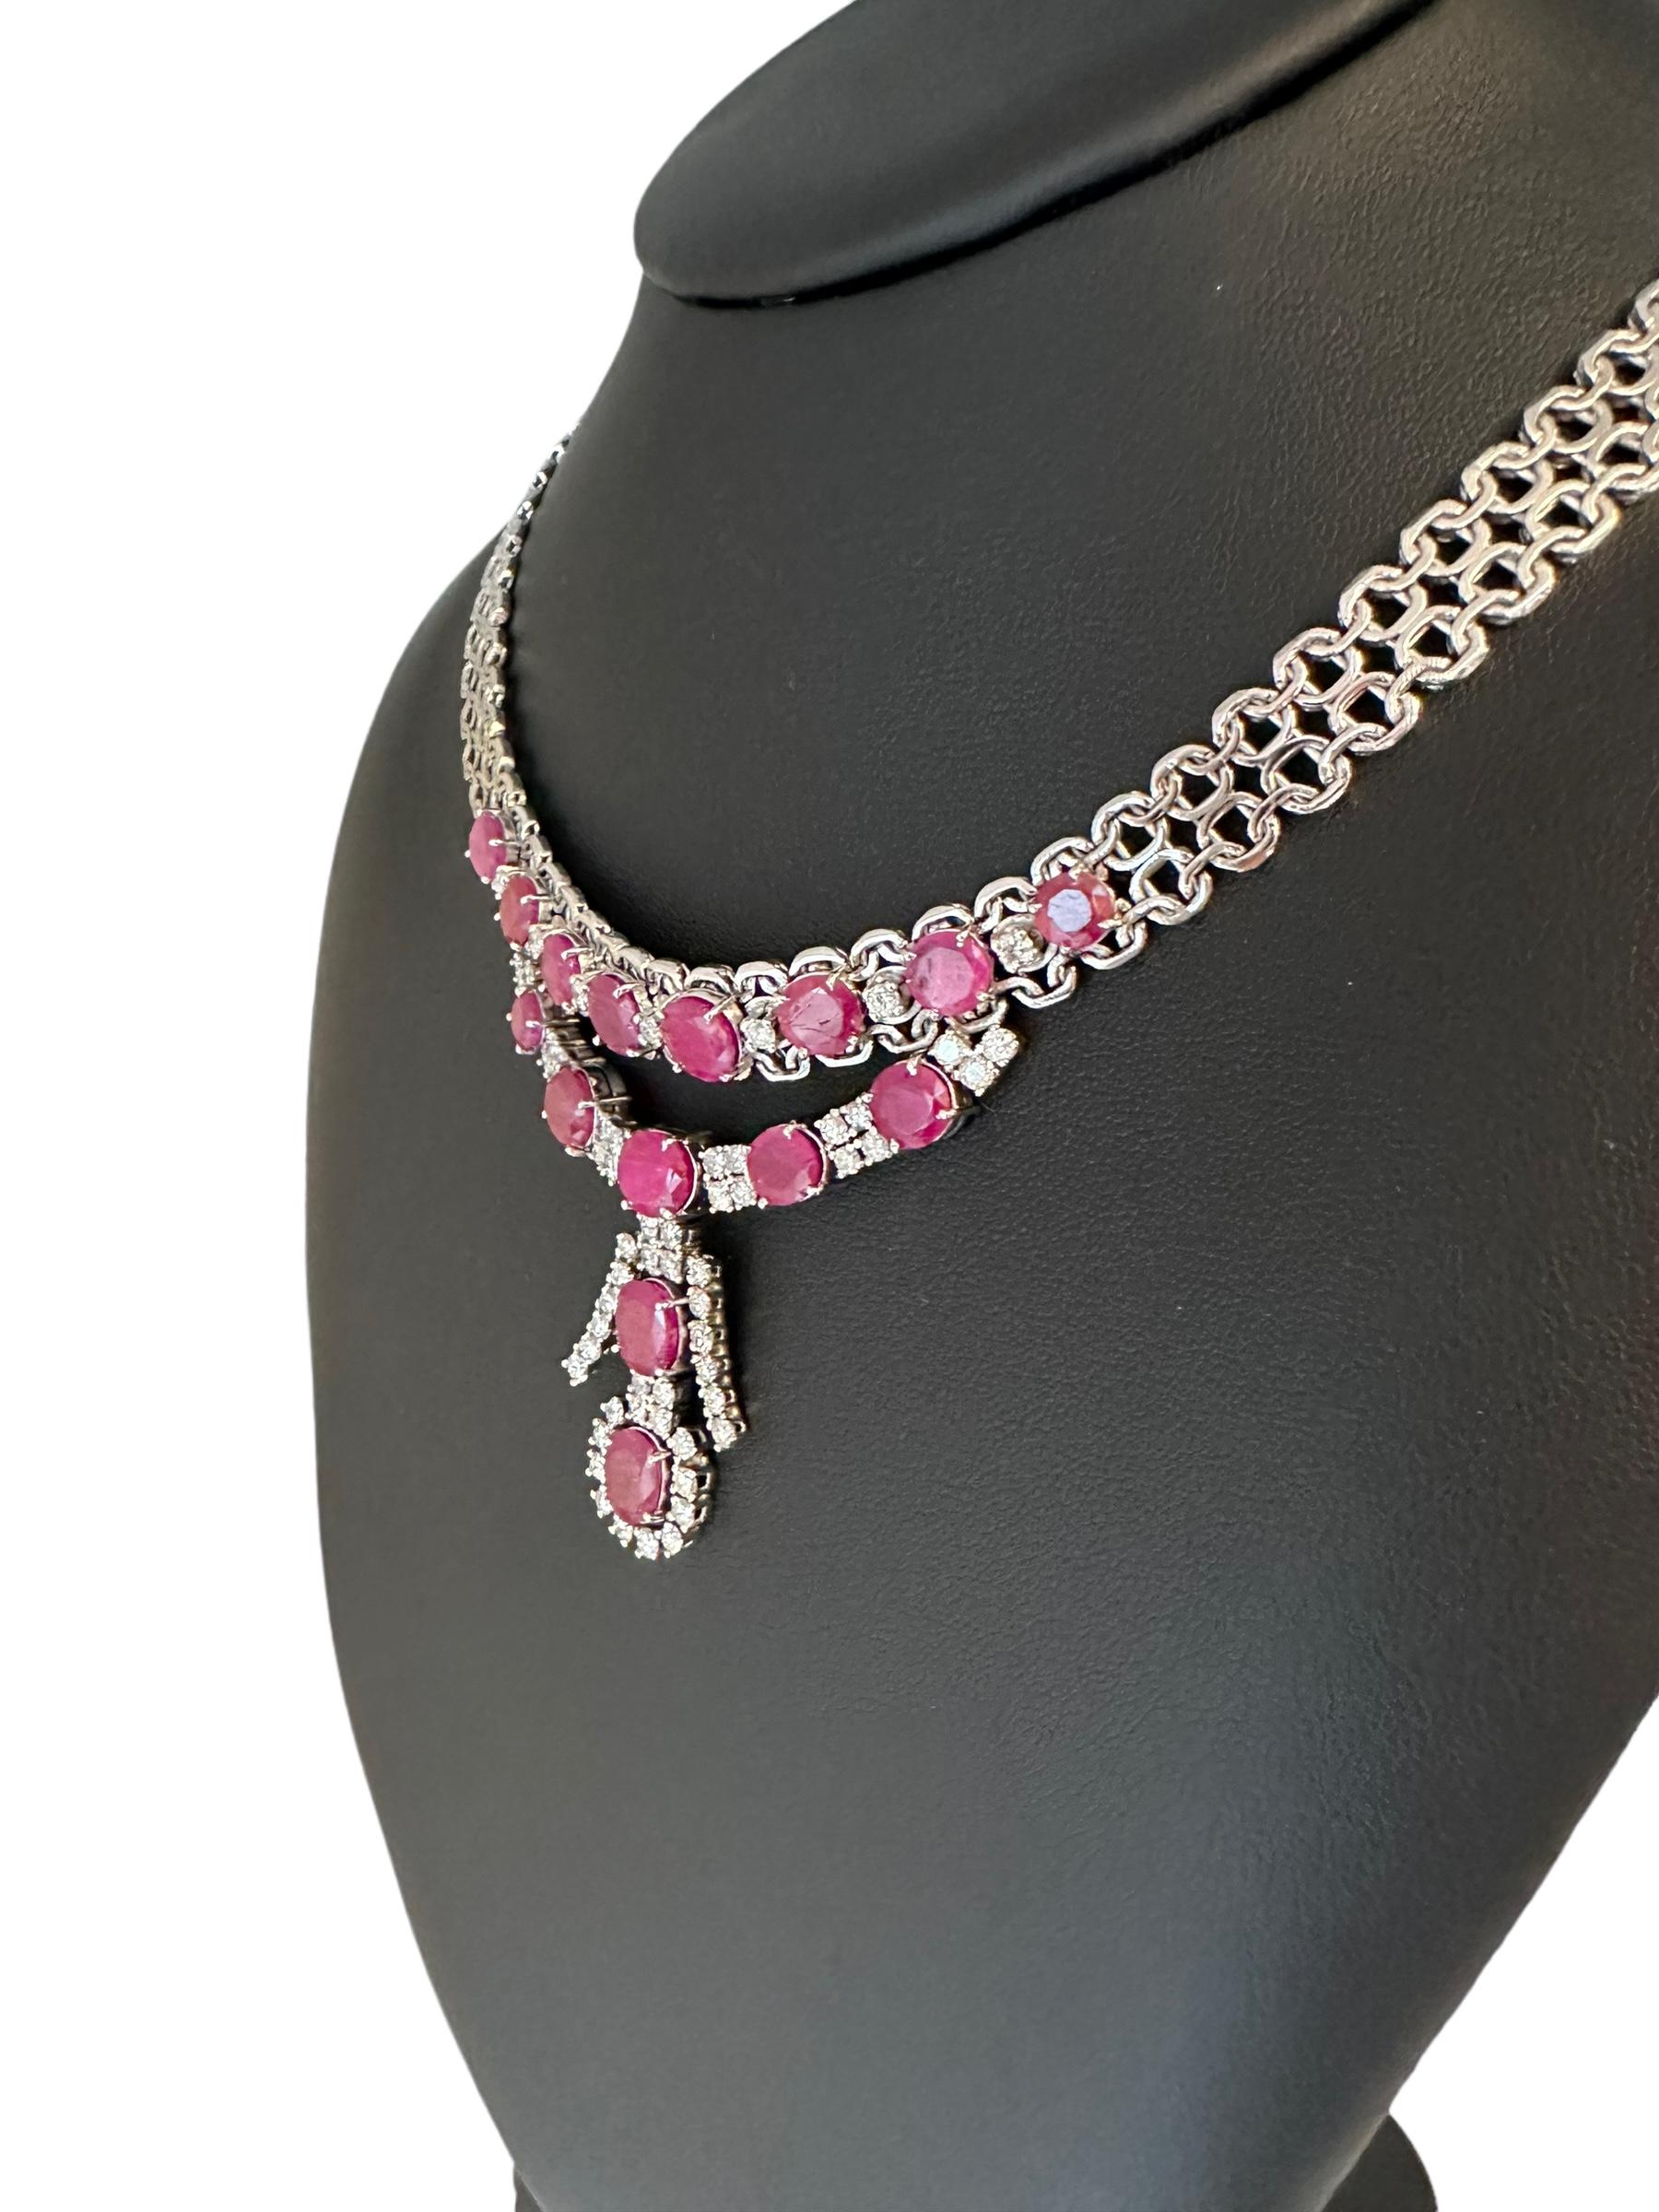 IGI Certified White Gold Diamonds and Rubies Necklace For Sale 3